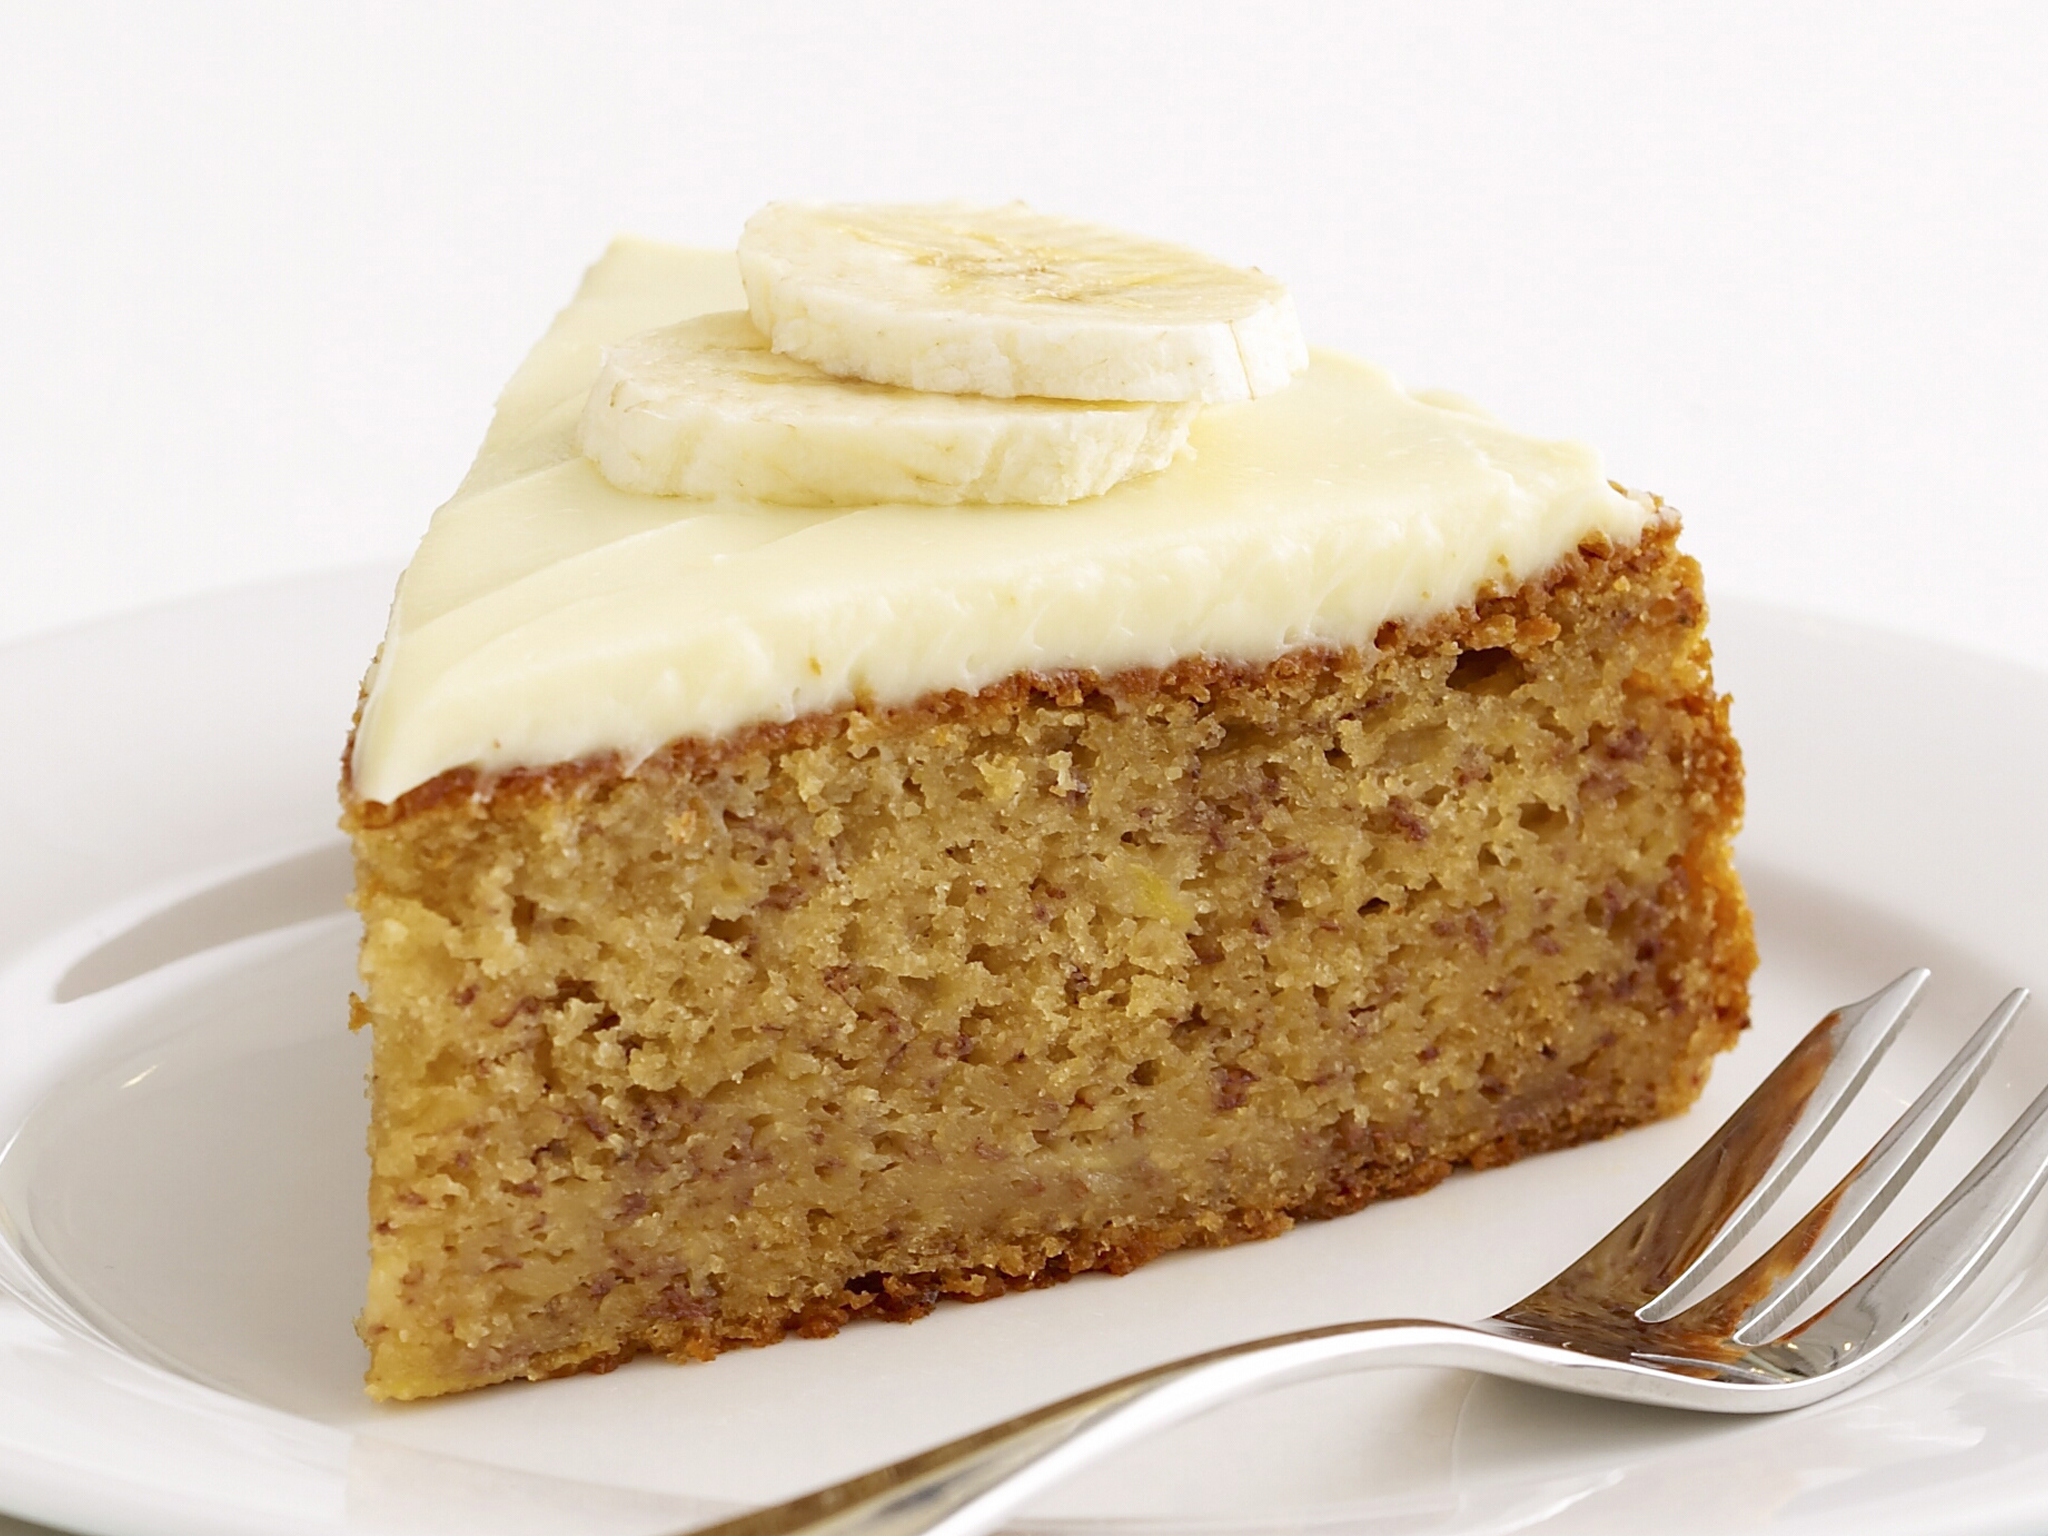 banan cake with cream frosting